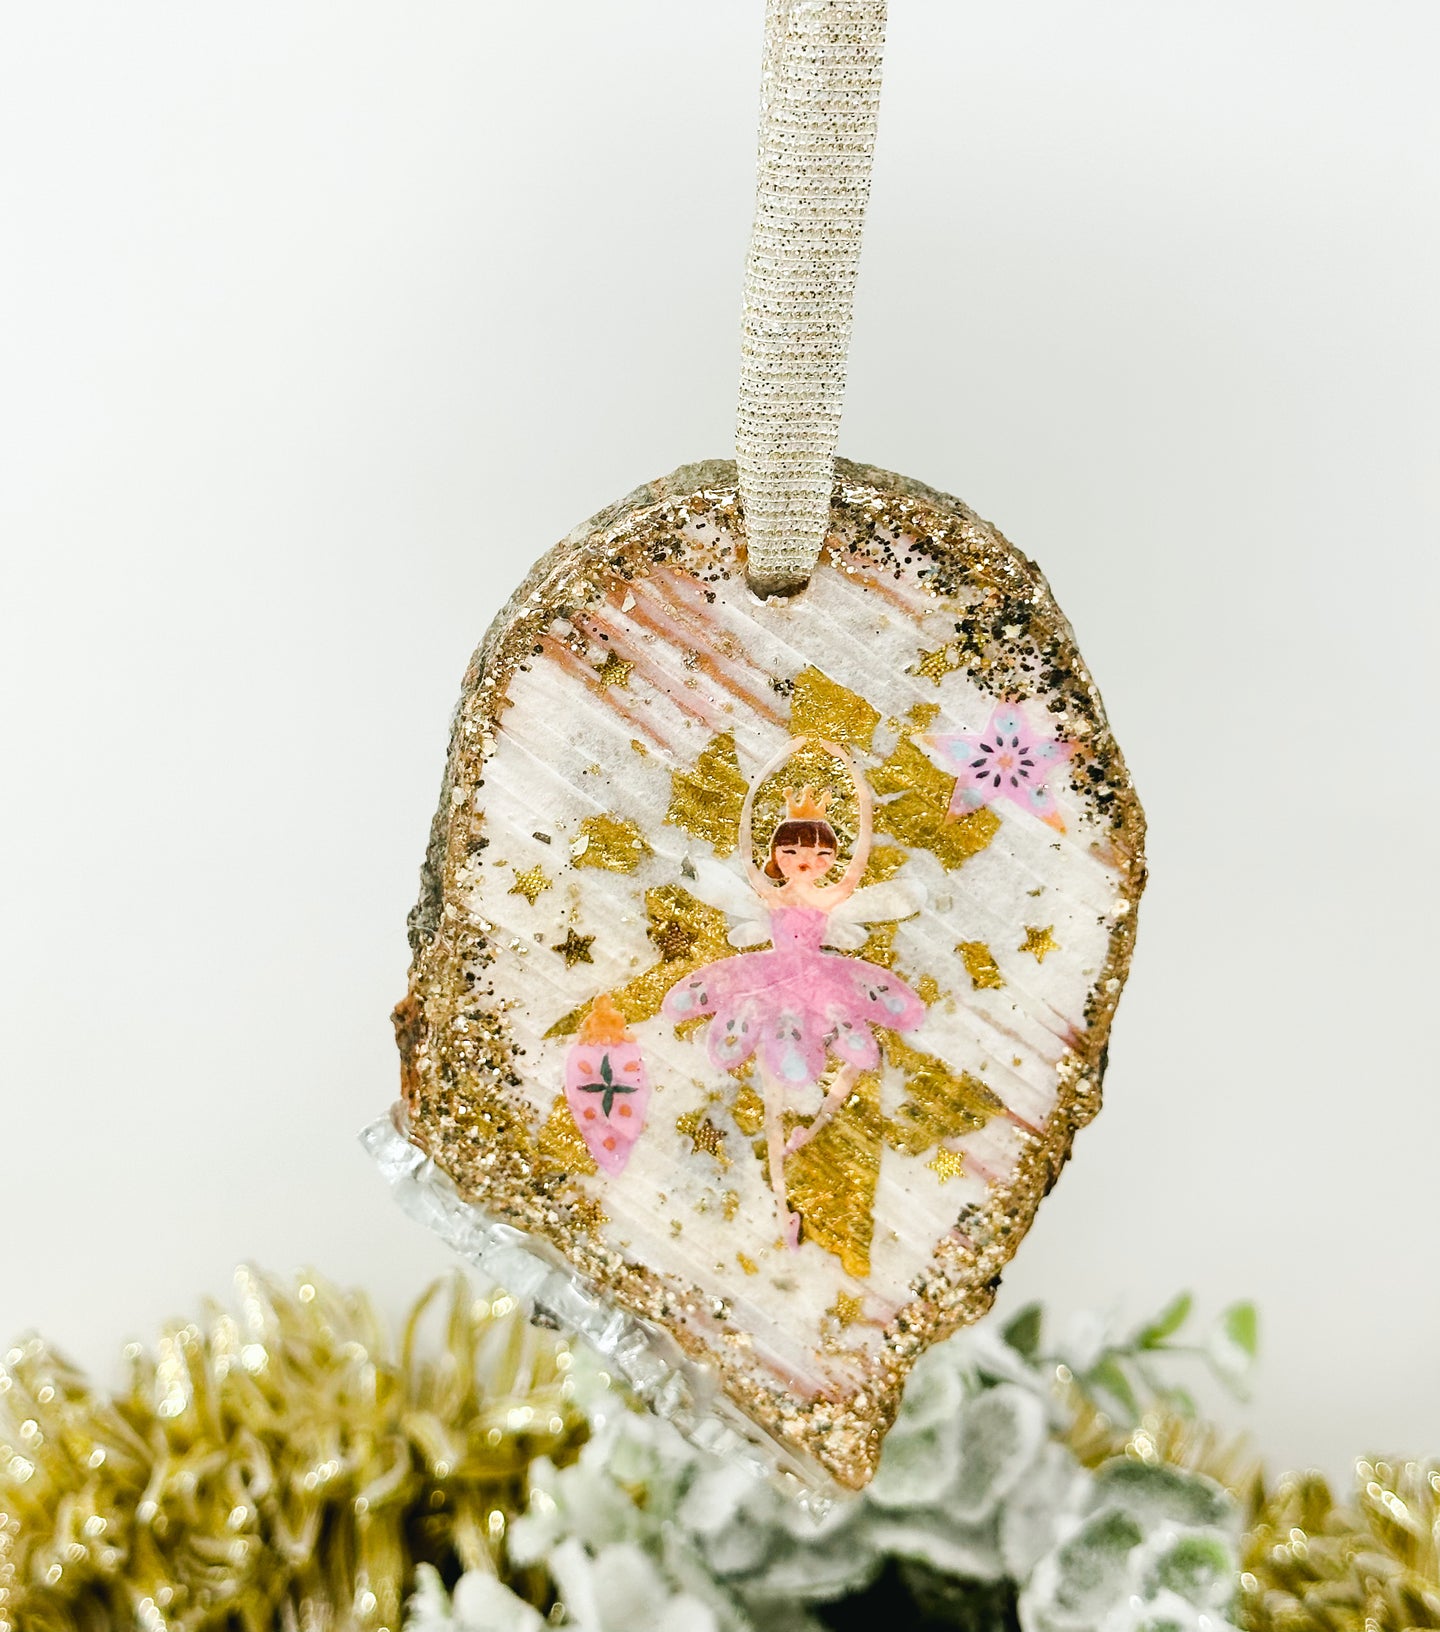 Ballerina with gold foil and star confetti